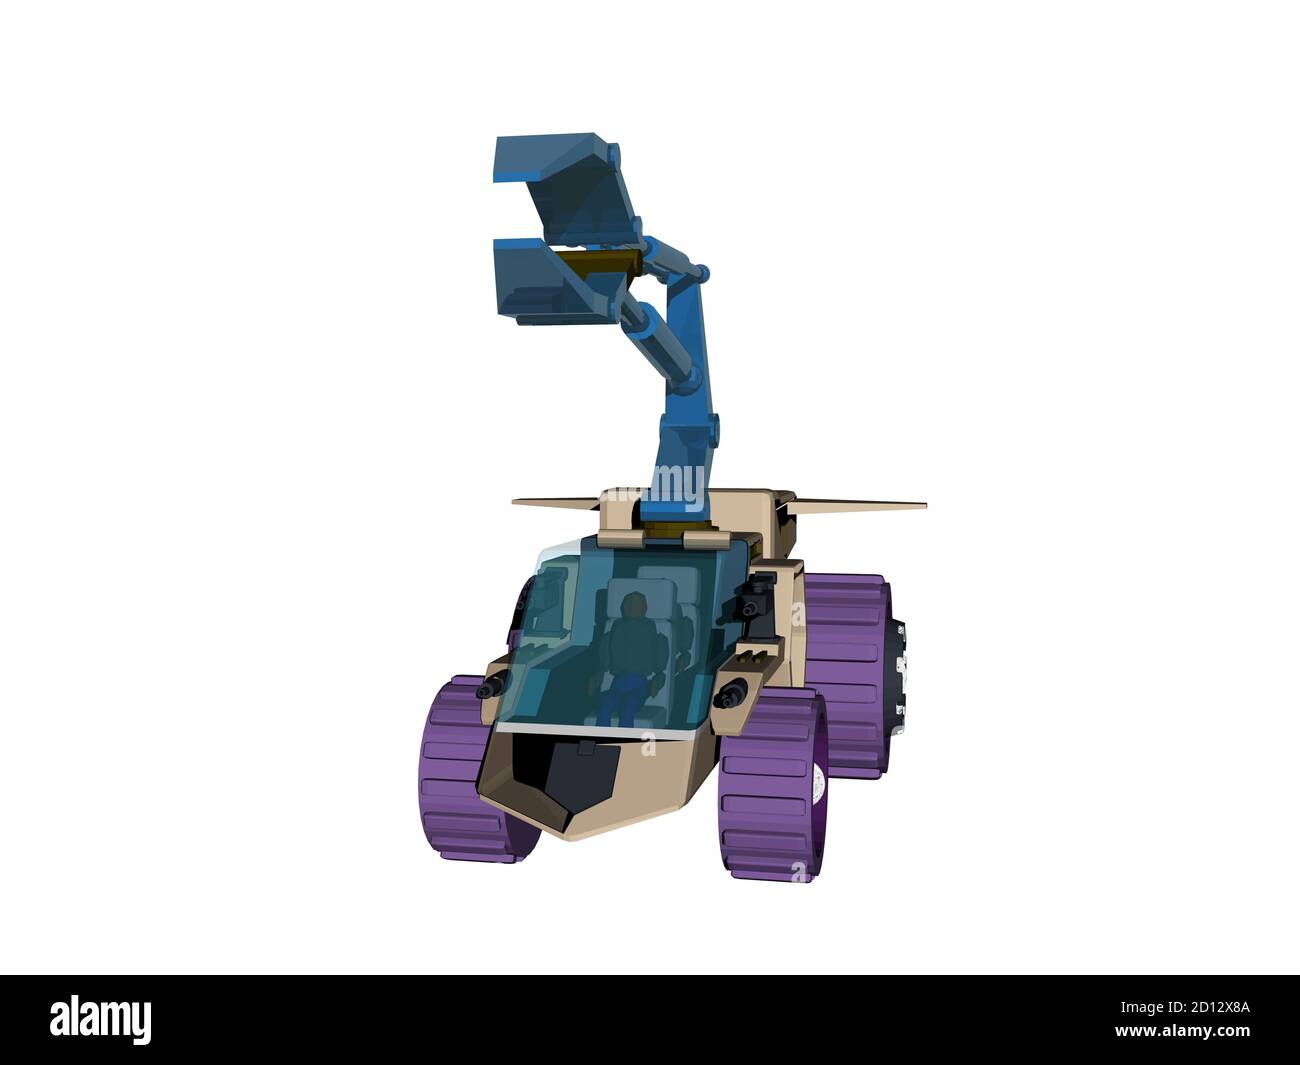 Robotic vehicle with gripper arm to defuse bombs Stock Photo